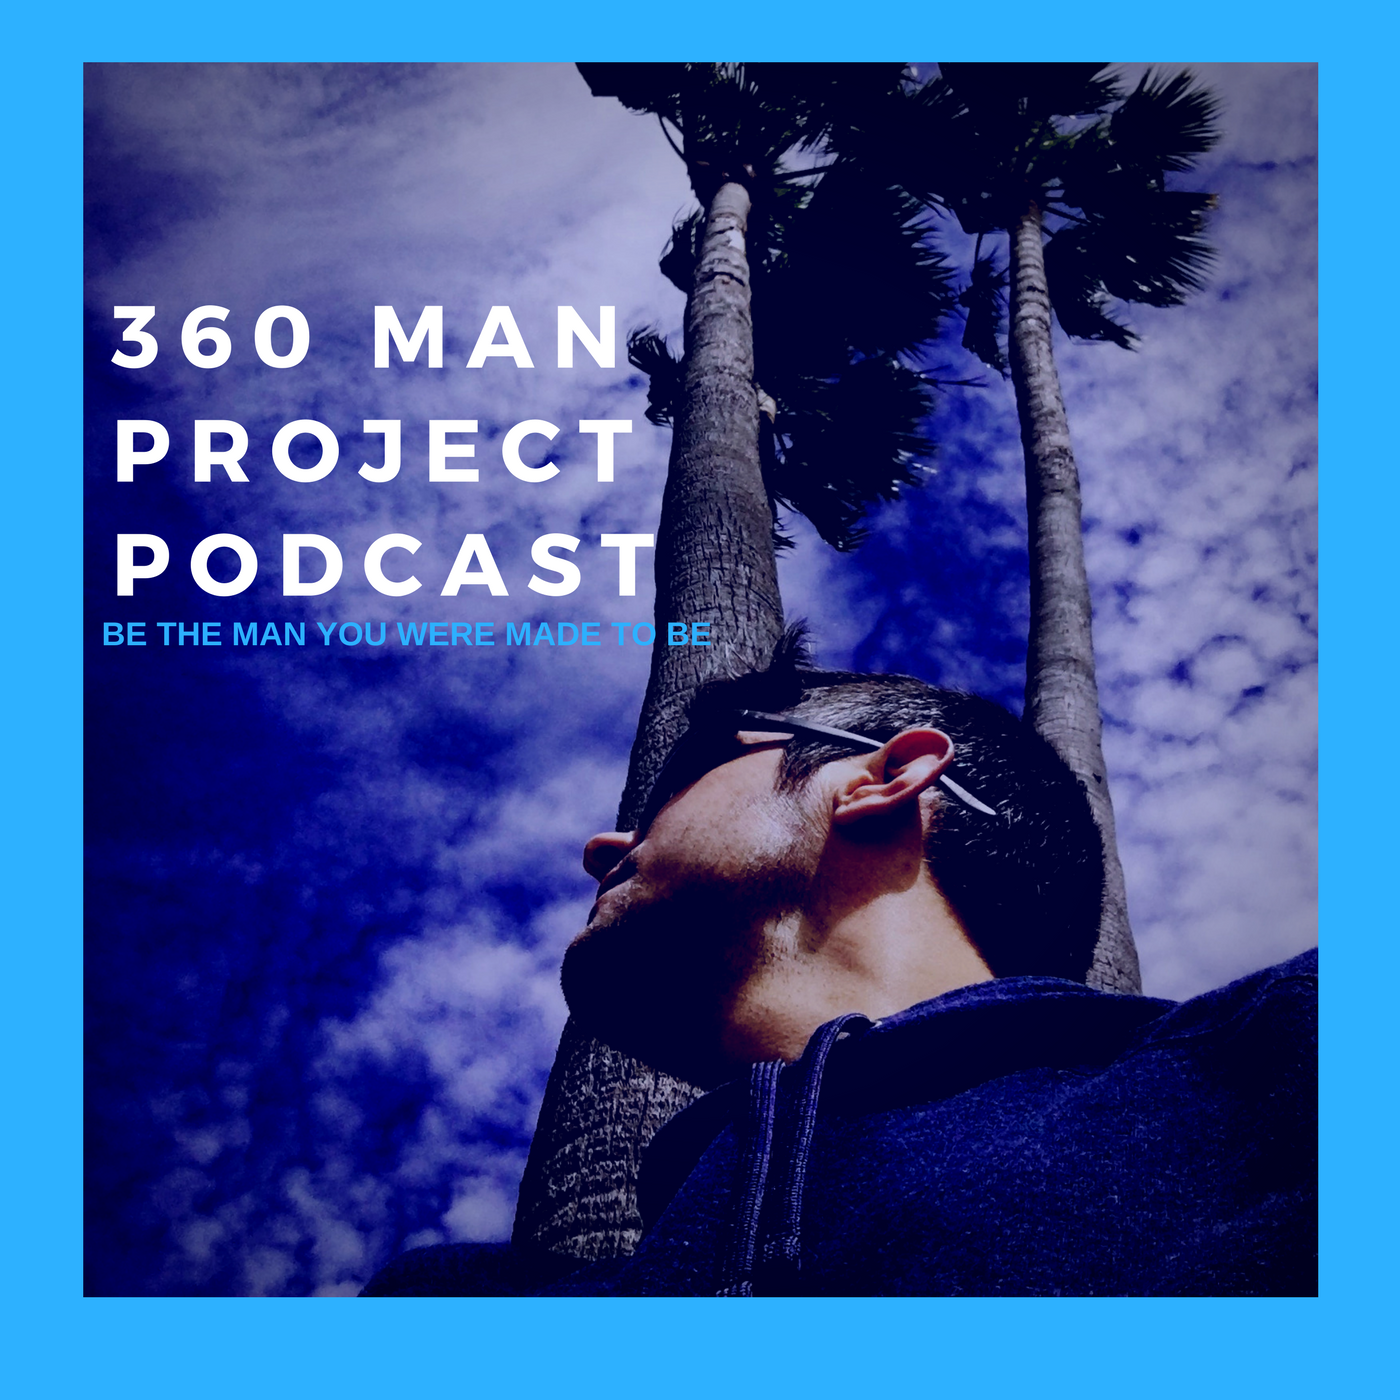 The 360 Man Project Podcast